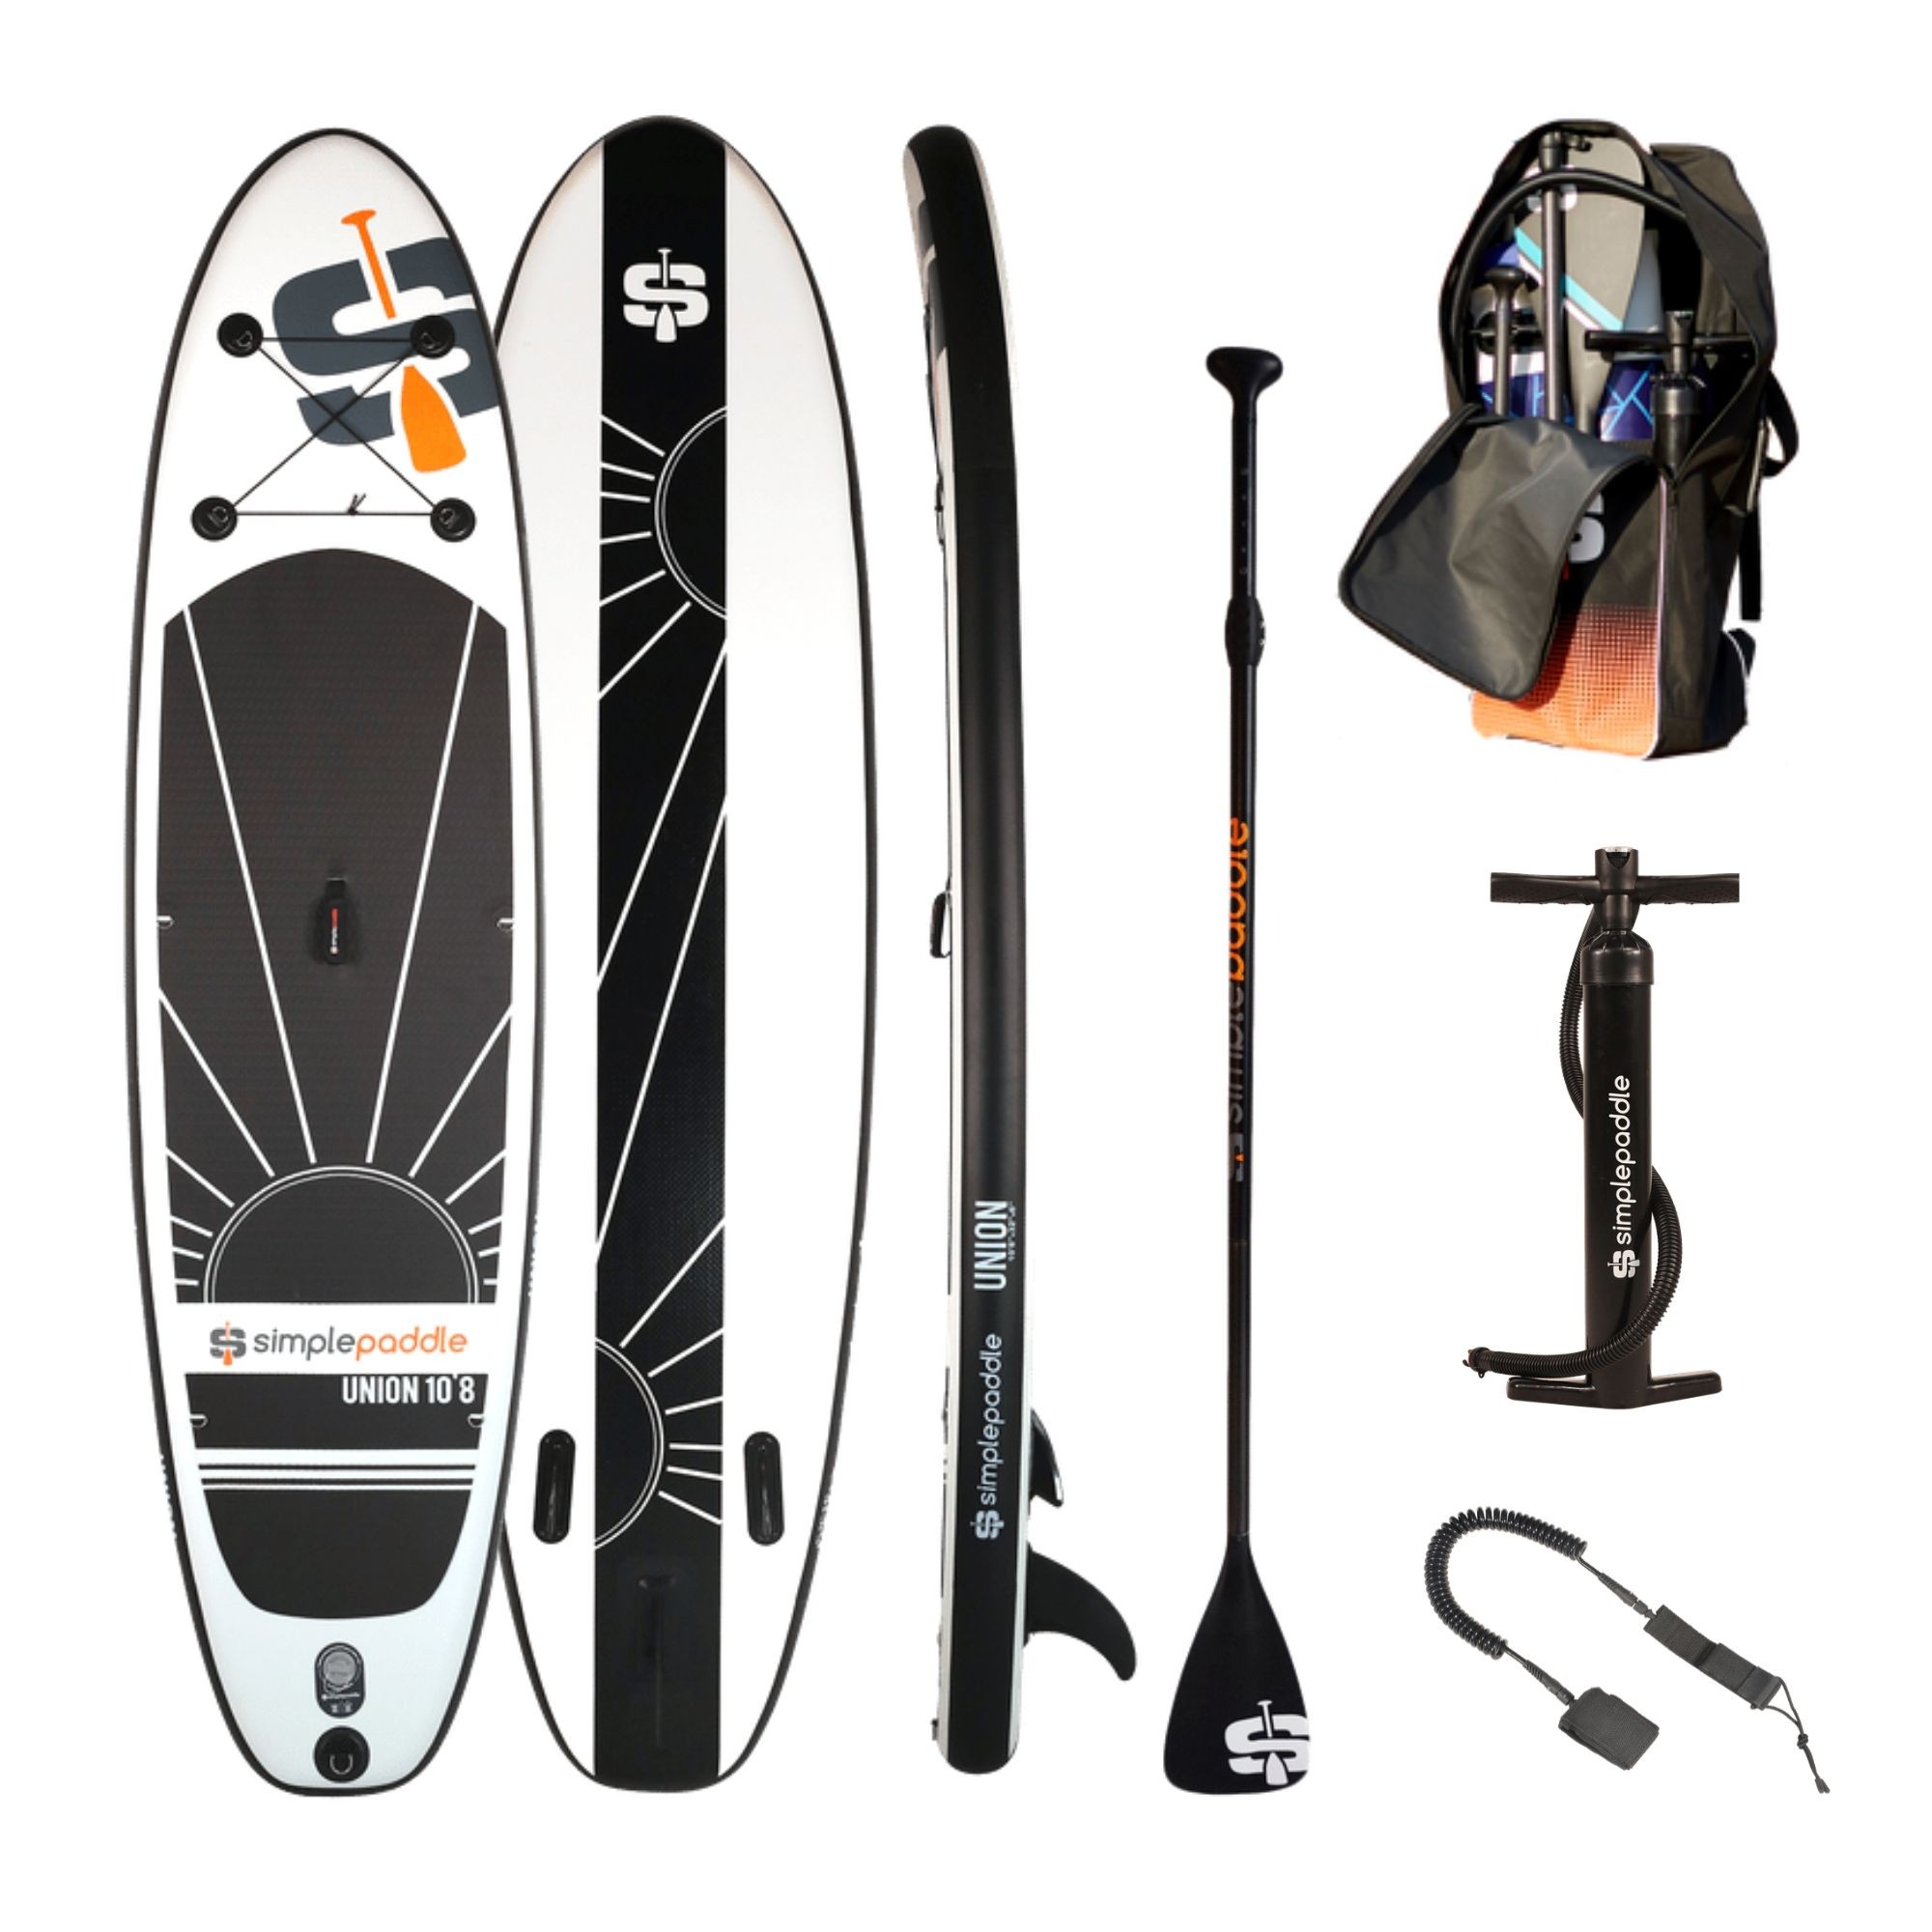 Paddle Surf Hinchable 10'8 Simple Paddle Con Accesorios - negro - 